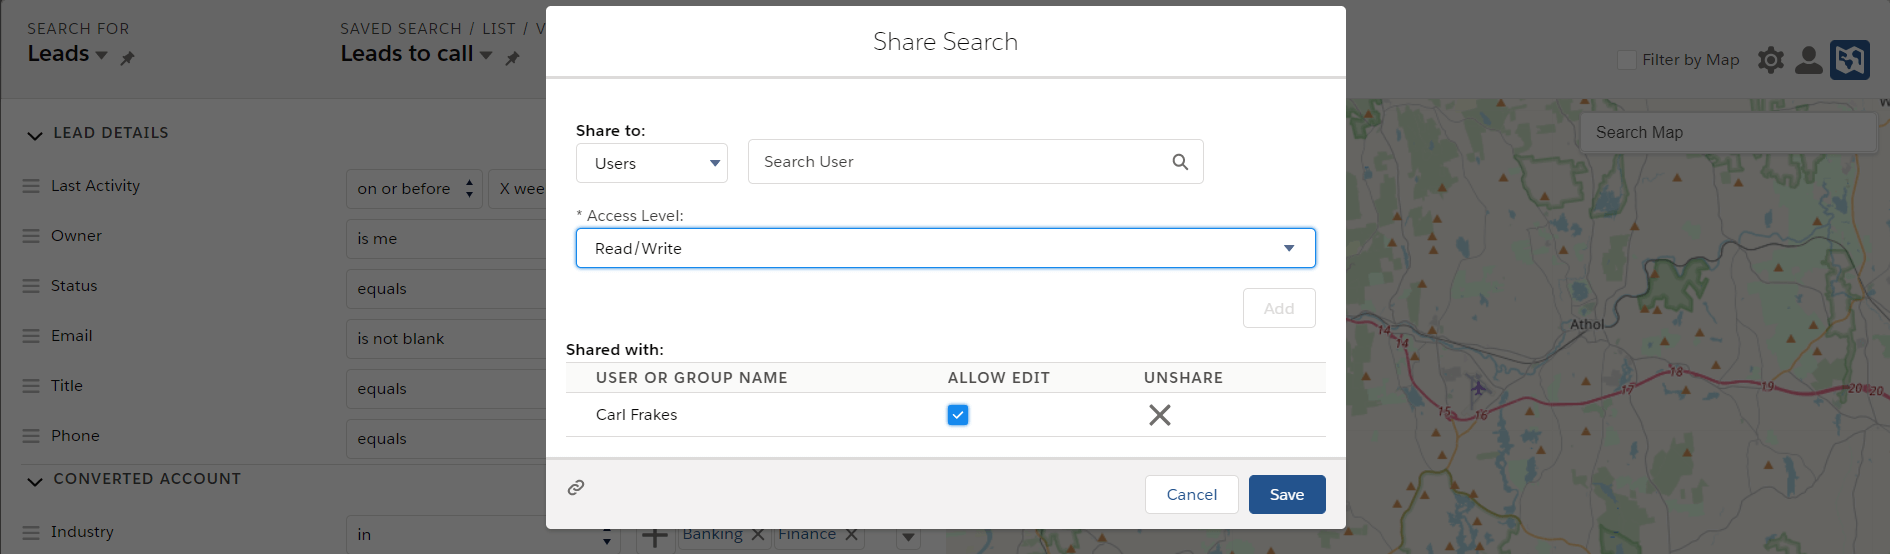 Sharing search